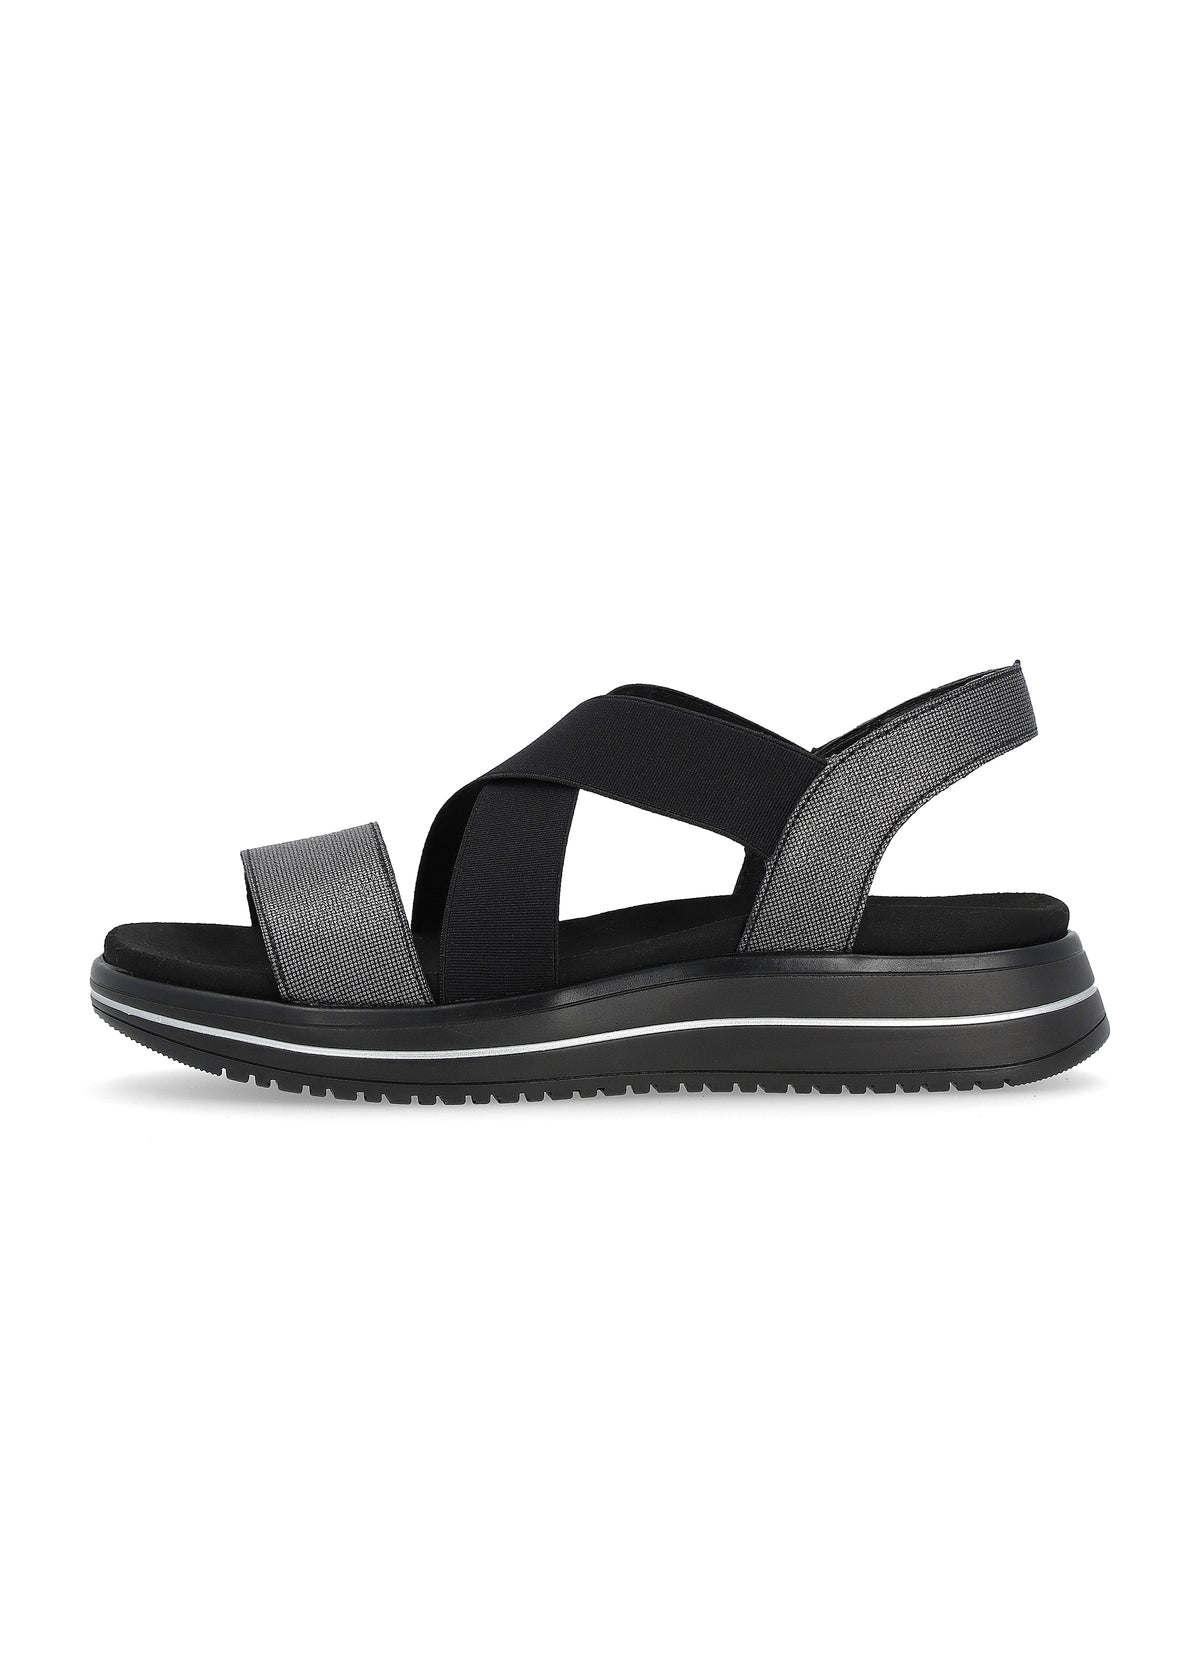 Sandals with a thick sole - black, elastic straps